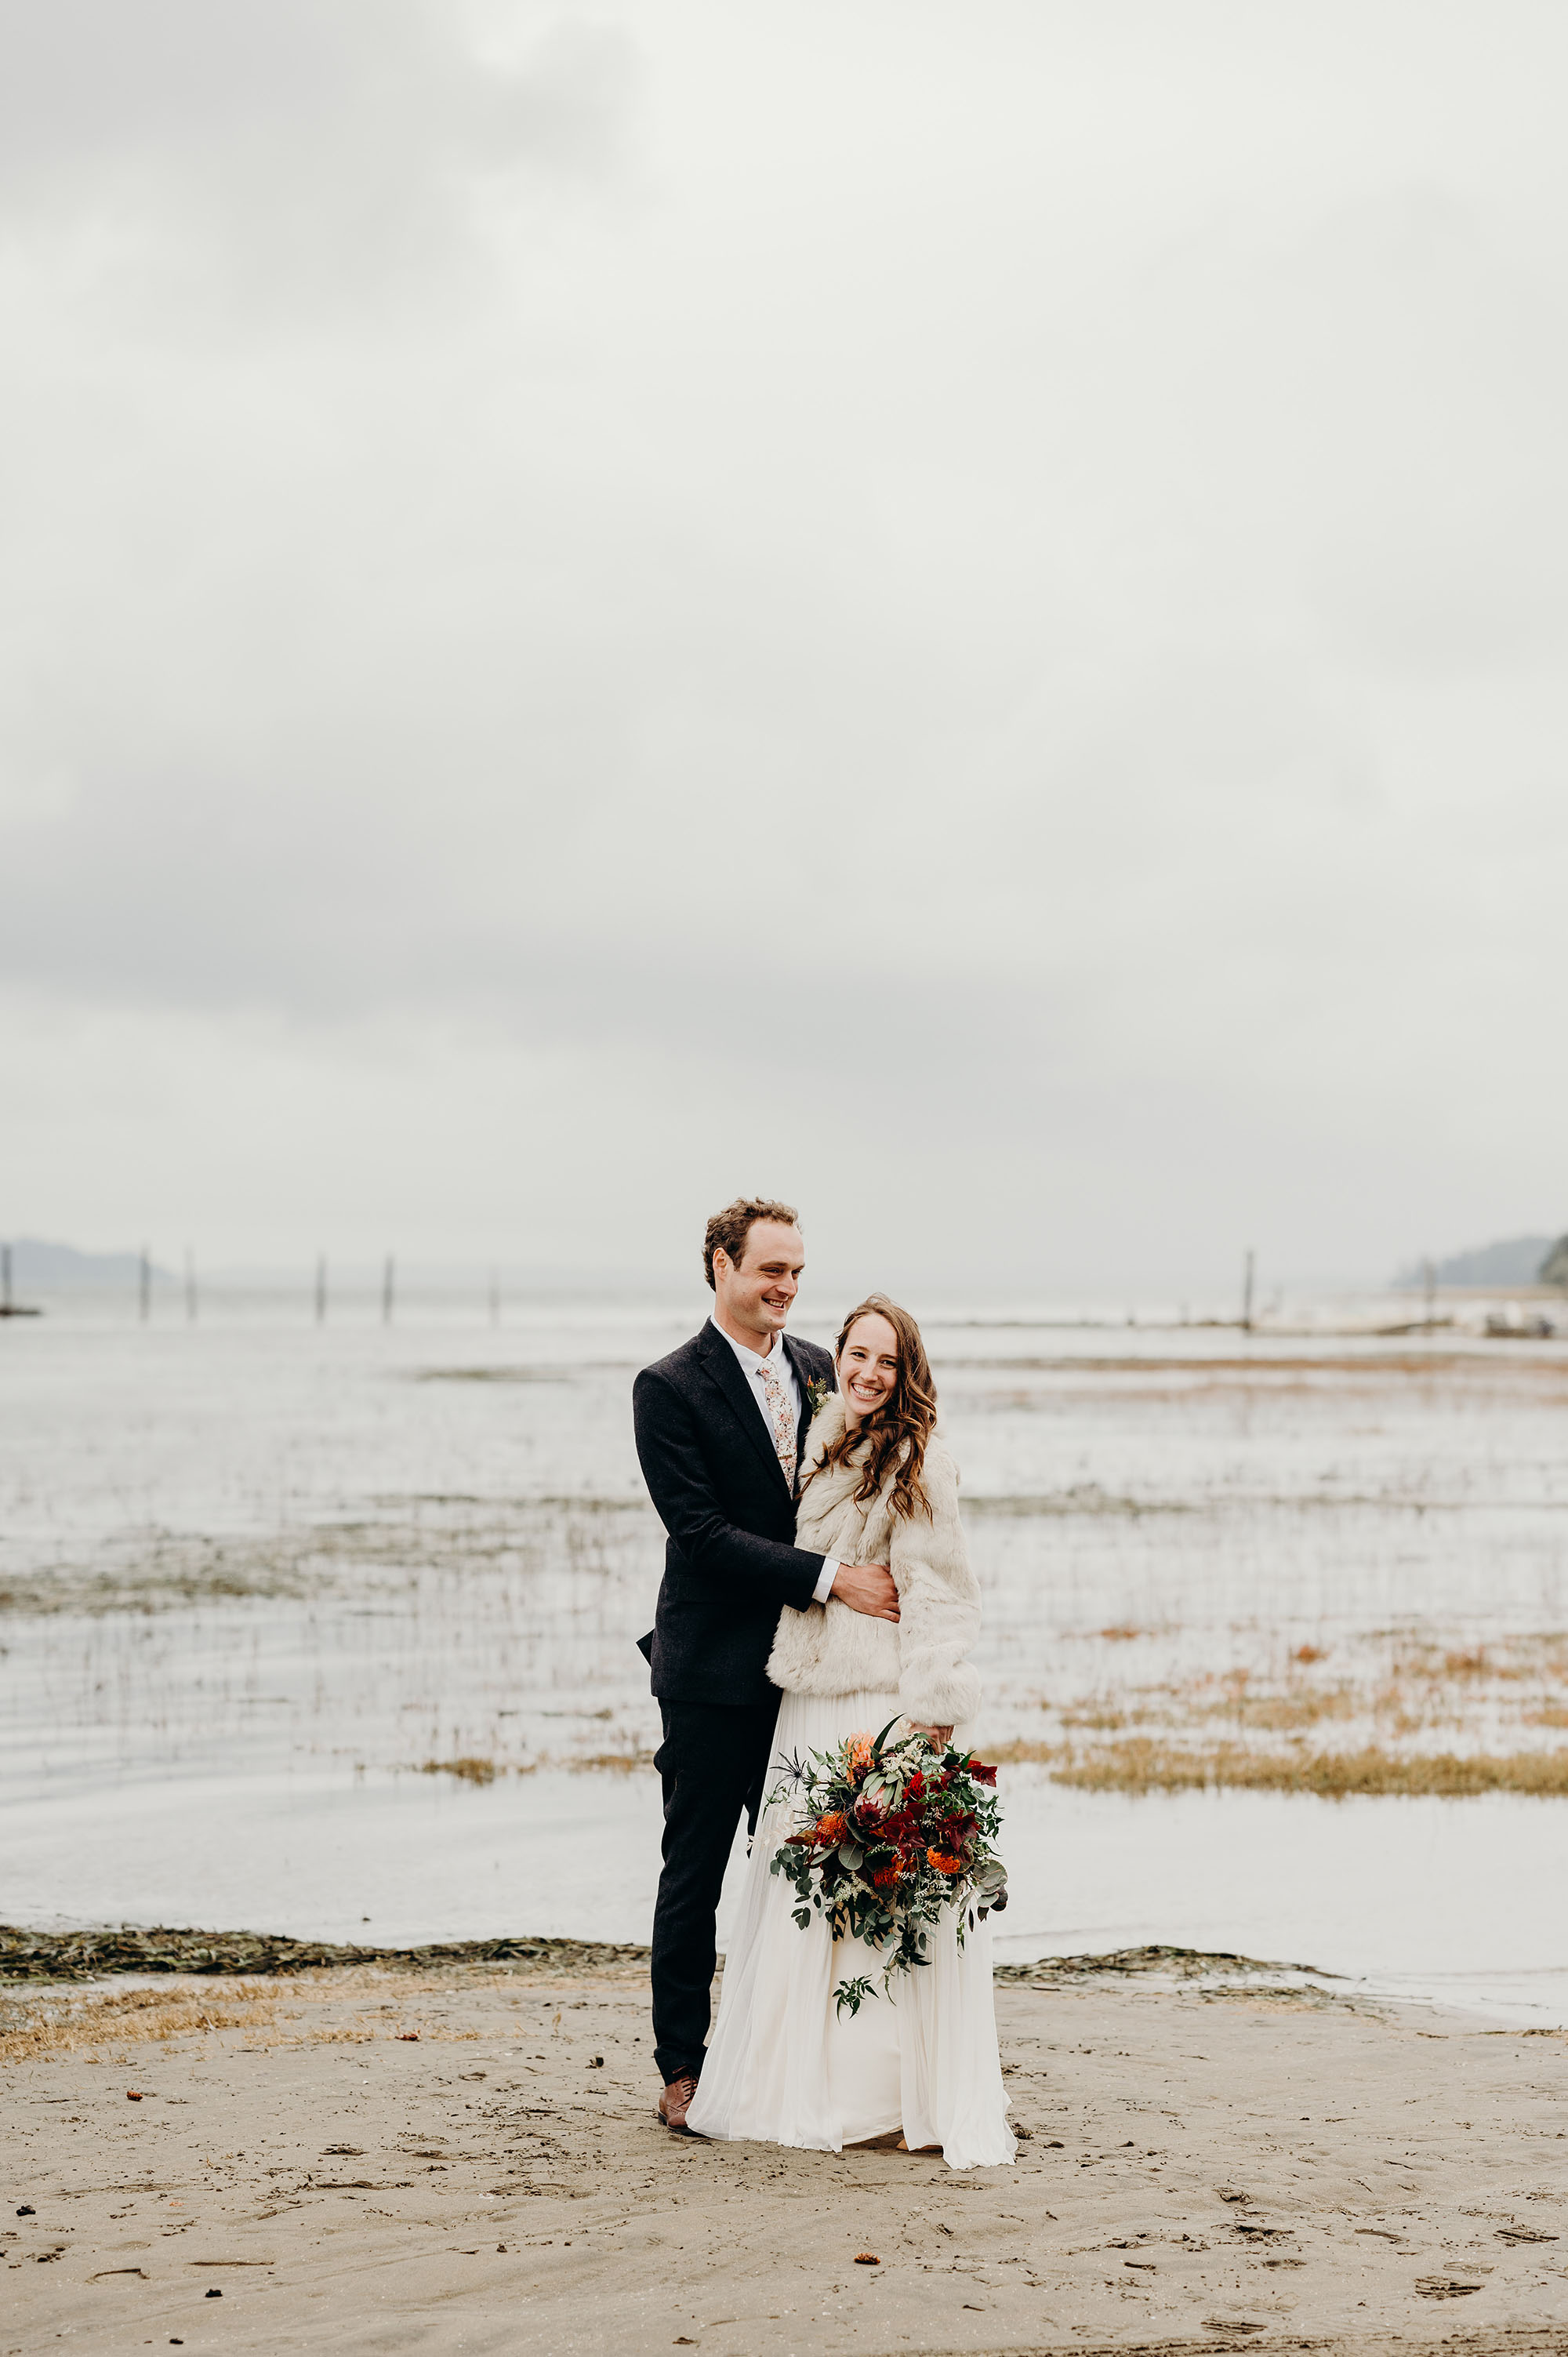 Bride & Groom Smiling Portrait in Long Beach, WA by Briana Morrison Photography